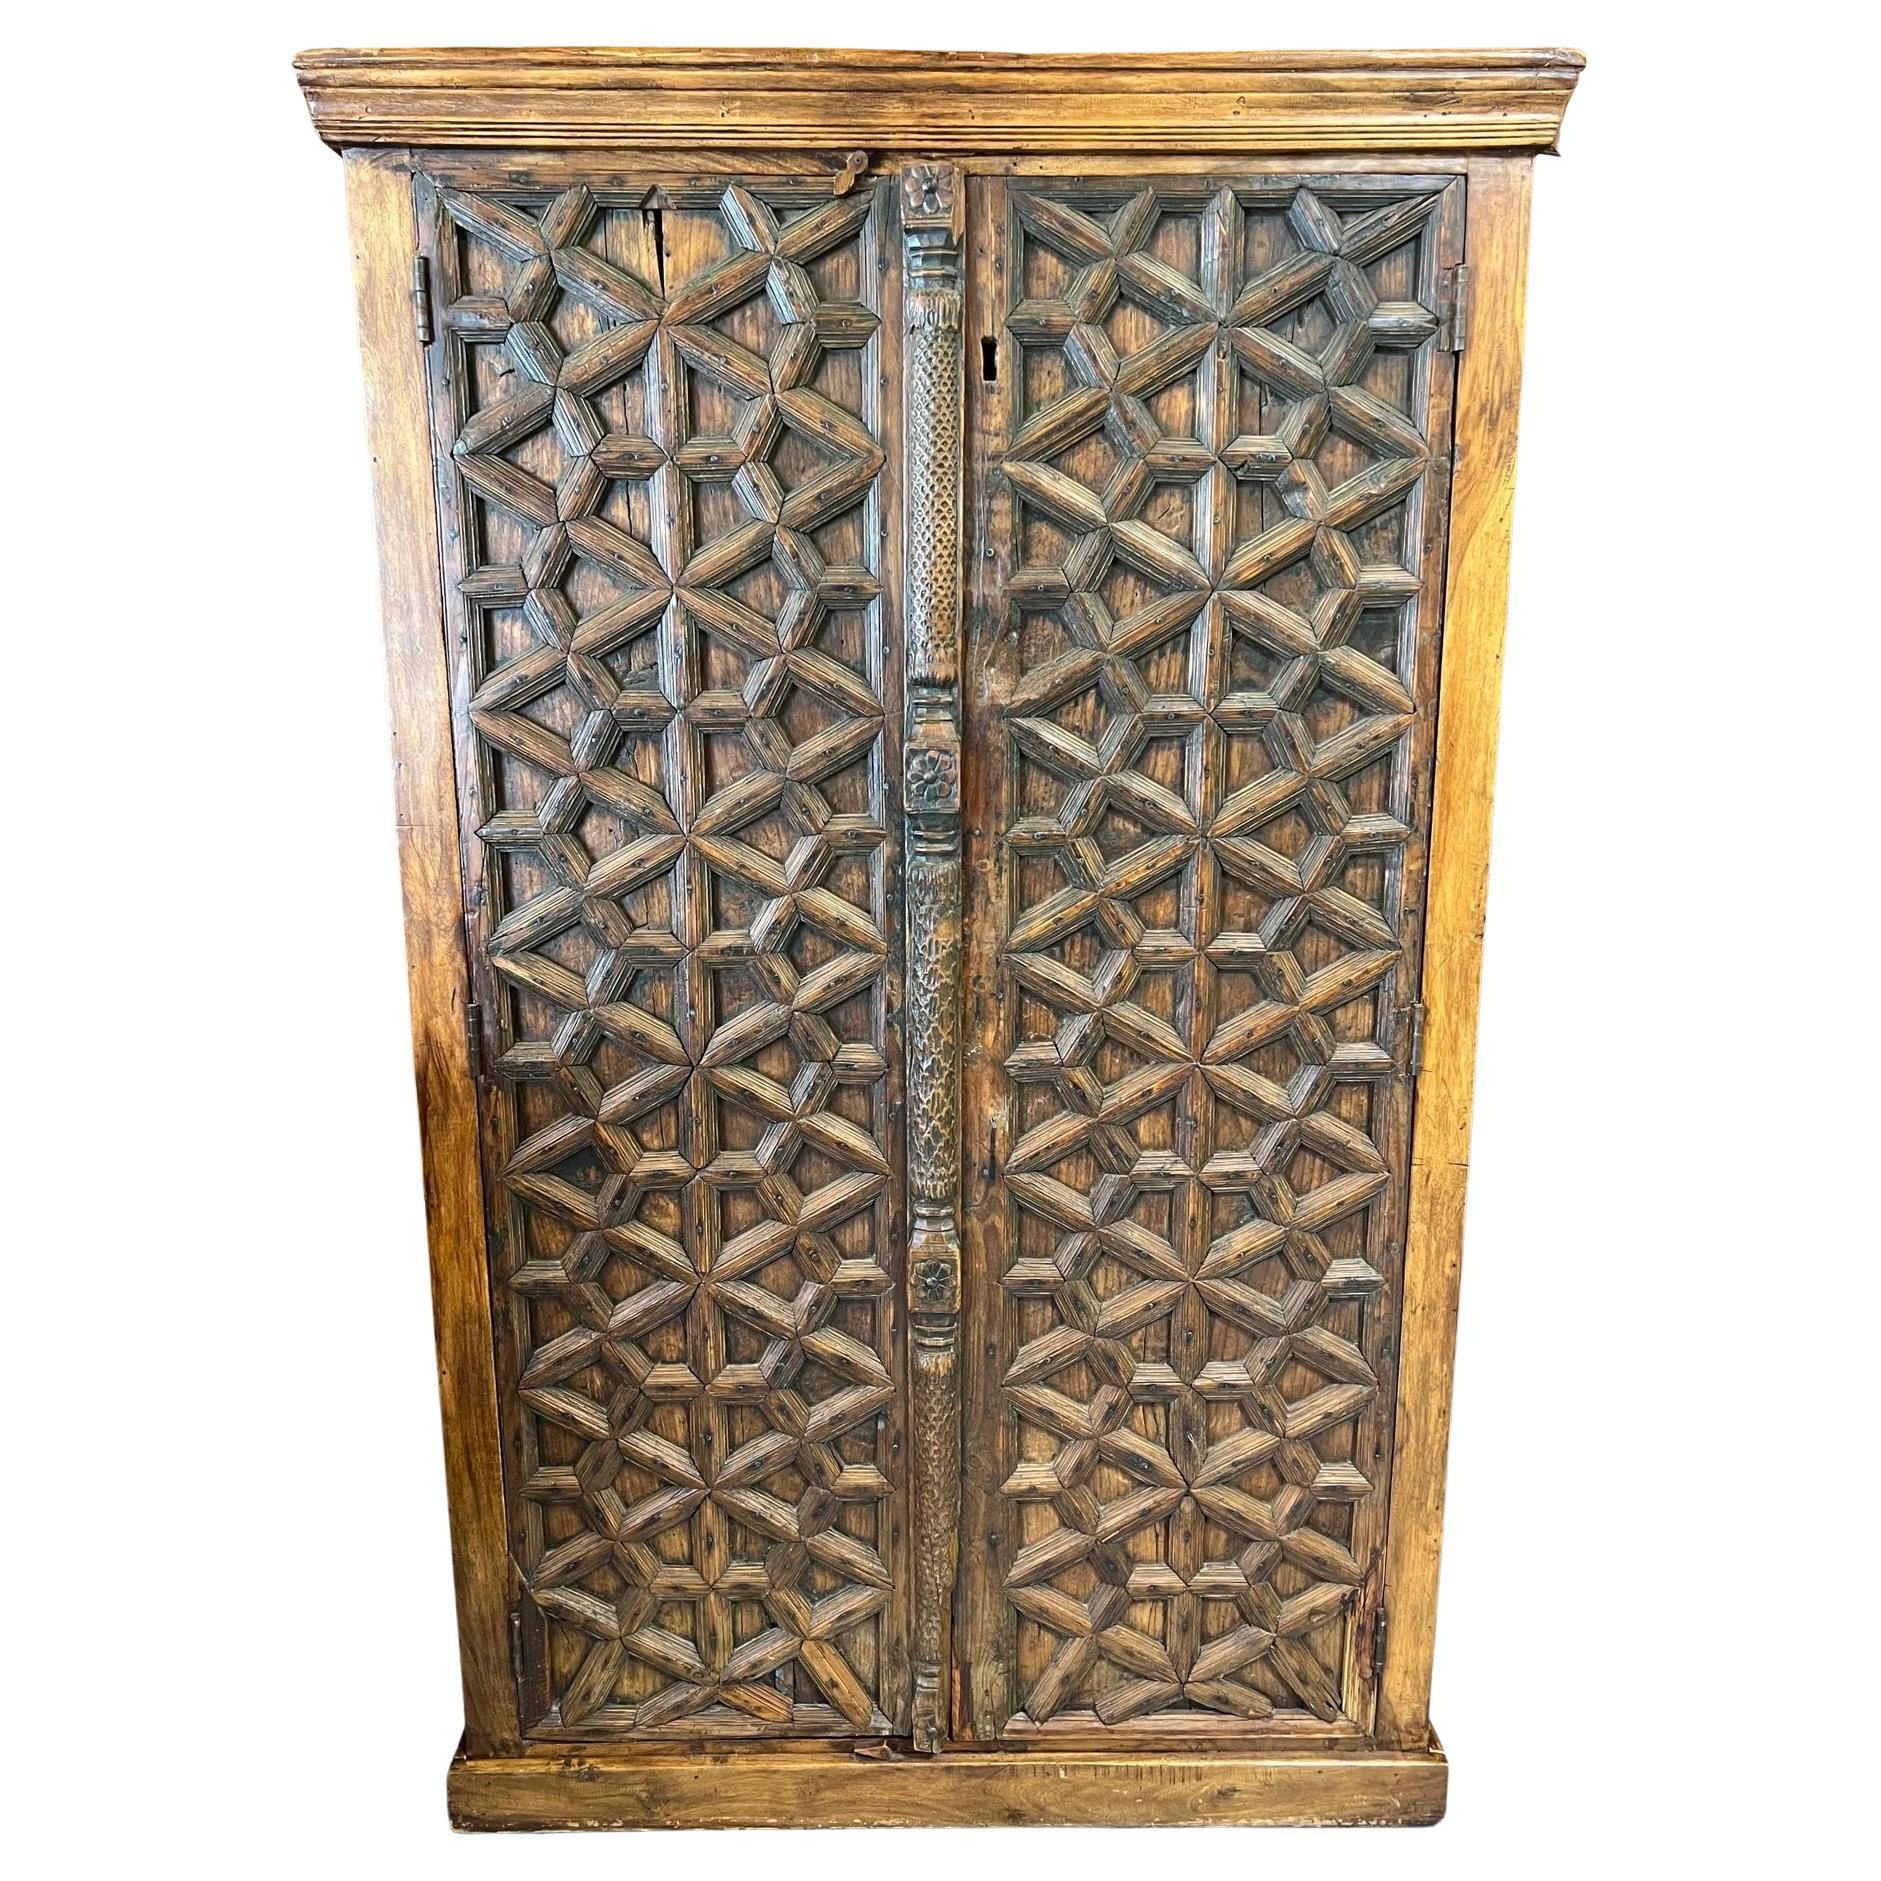 Large Two Door Cabinet with Antique Carved Wood Doors from India